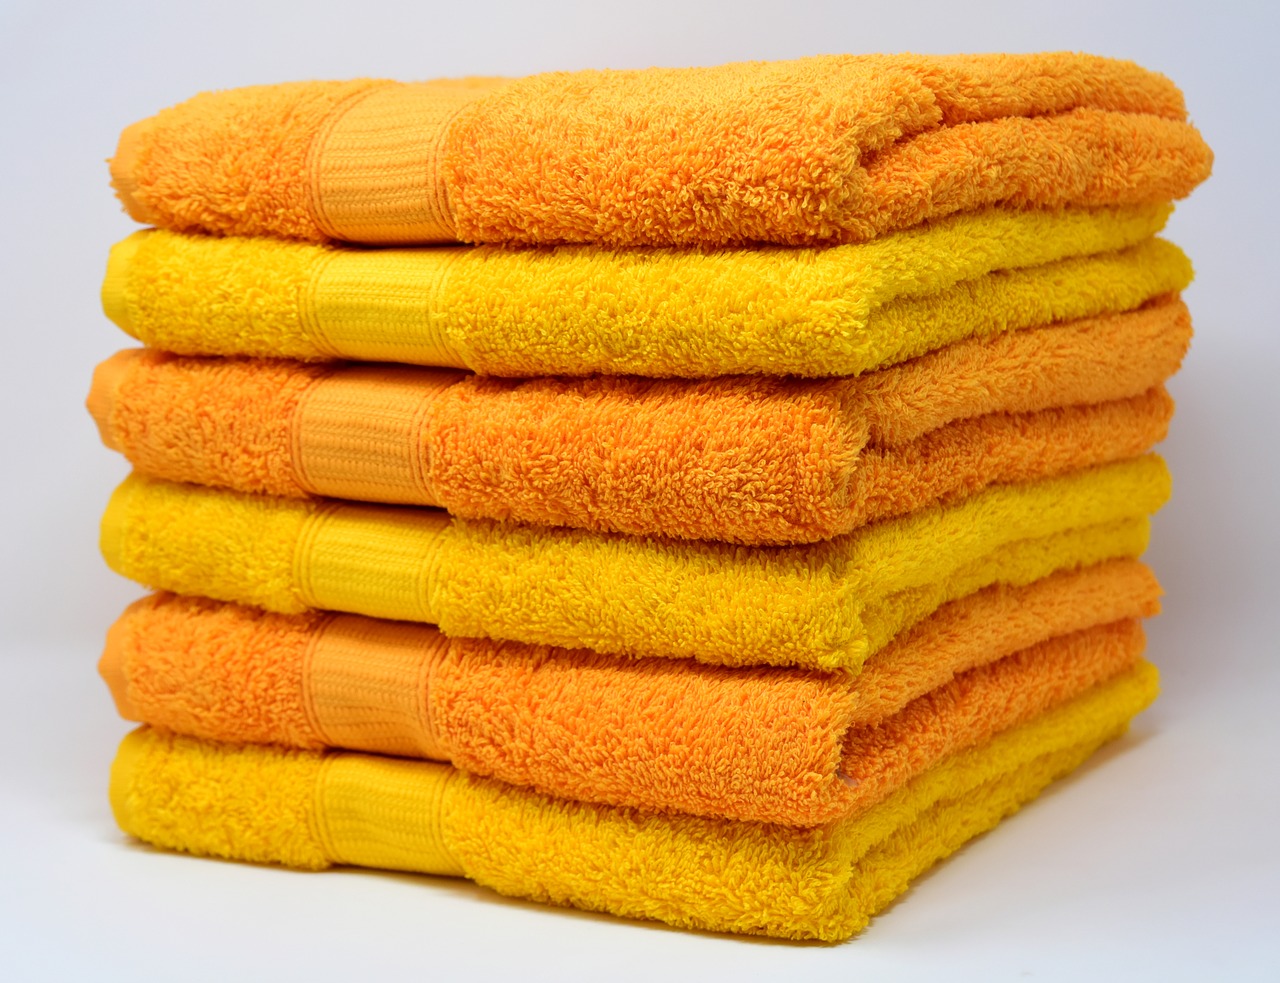 Terry towels - fabrics that can absorb large amounts of water